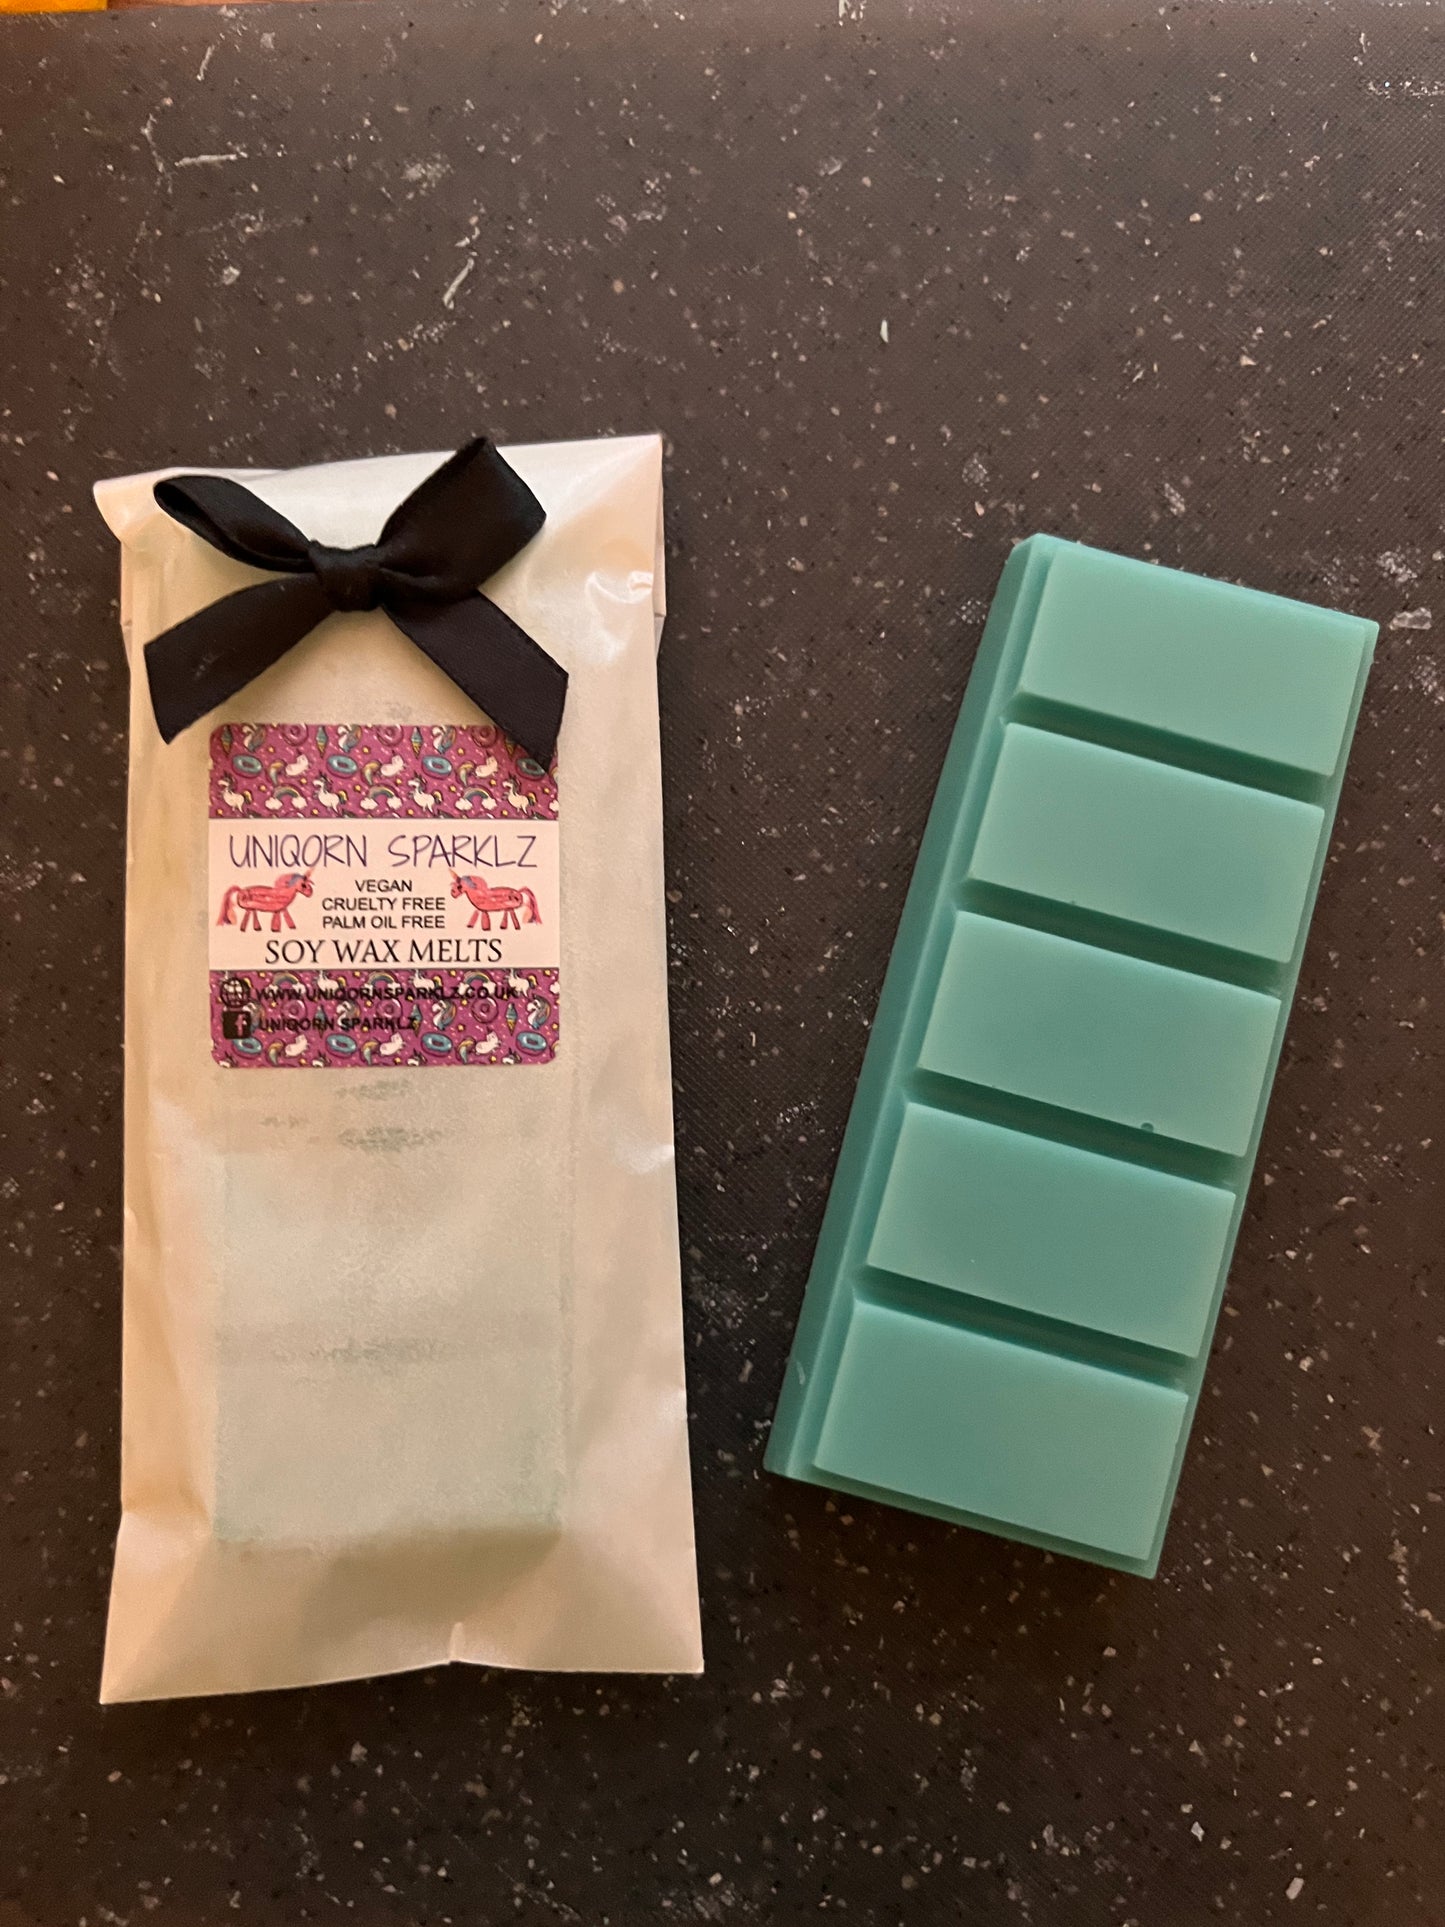 Clean and fresh wax melts